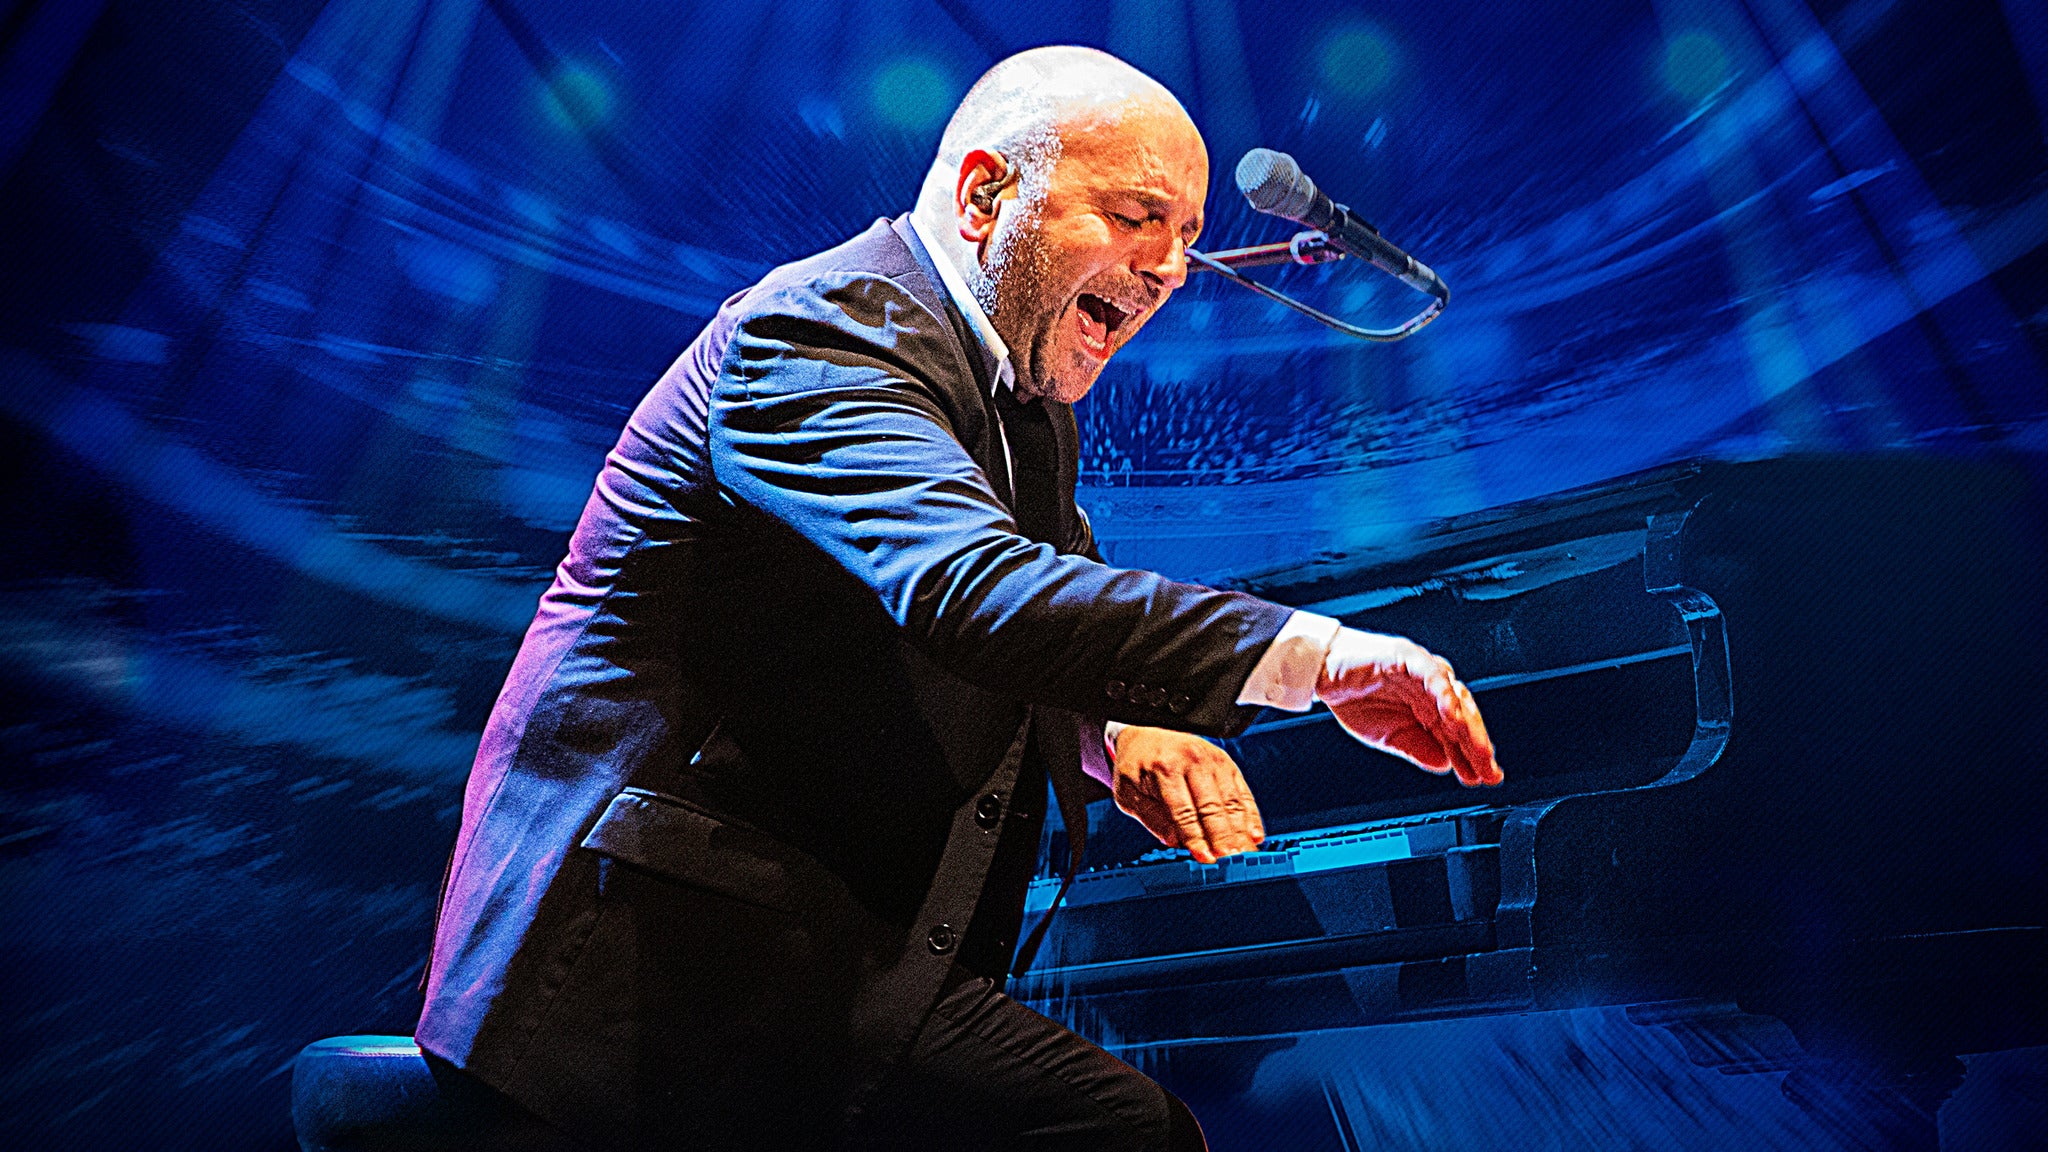 The Billy Joel Songbook in Hull promo photo for Ticketmaster presale offer code